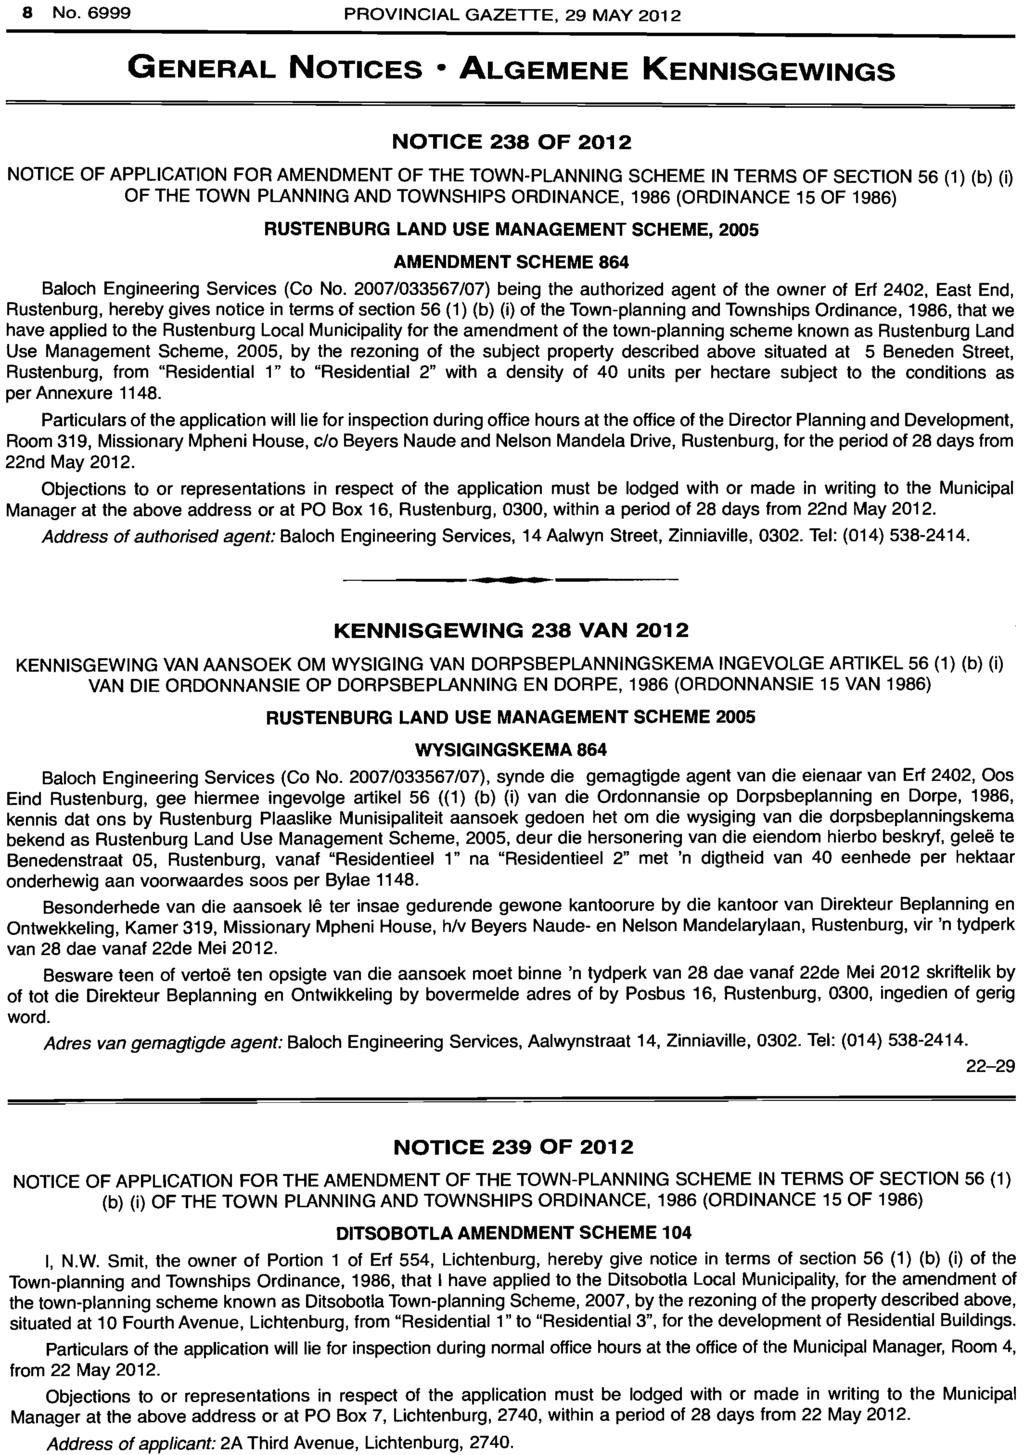 8 NO. PROVINCIAL GAZETTE, 29 MAY 2012 GENERAL NOTICES ALGEMENE KENNISGEWINGS NOTICE 238 OF 2012 NOTICE OF APPLICATION FOR AMENDMENT OF THE TOWN-PLANNING SCHEME IN TERMS OF SECTION 56 (1) (b) (i) OF